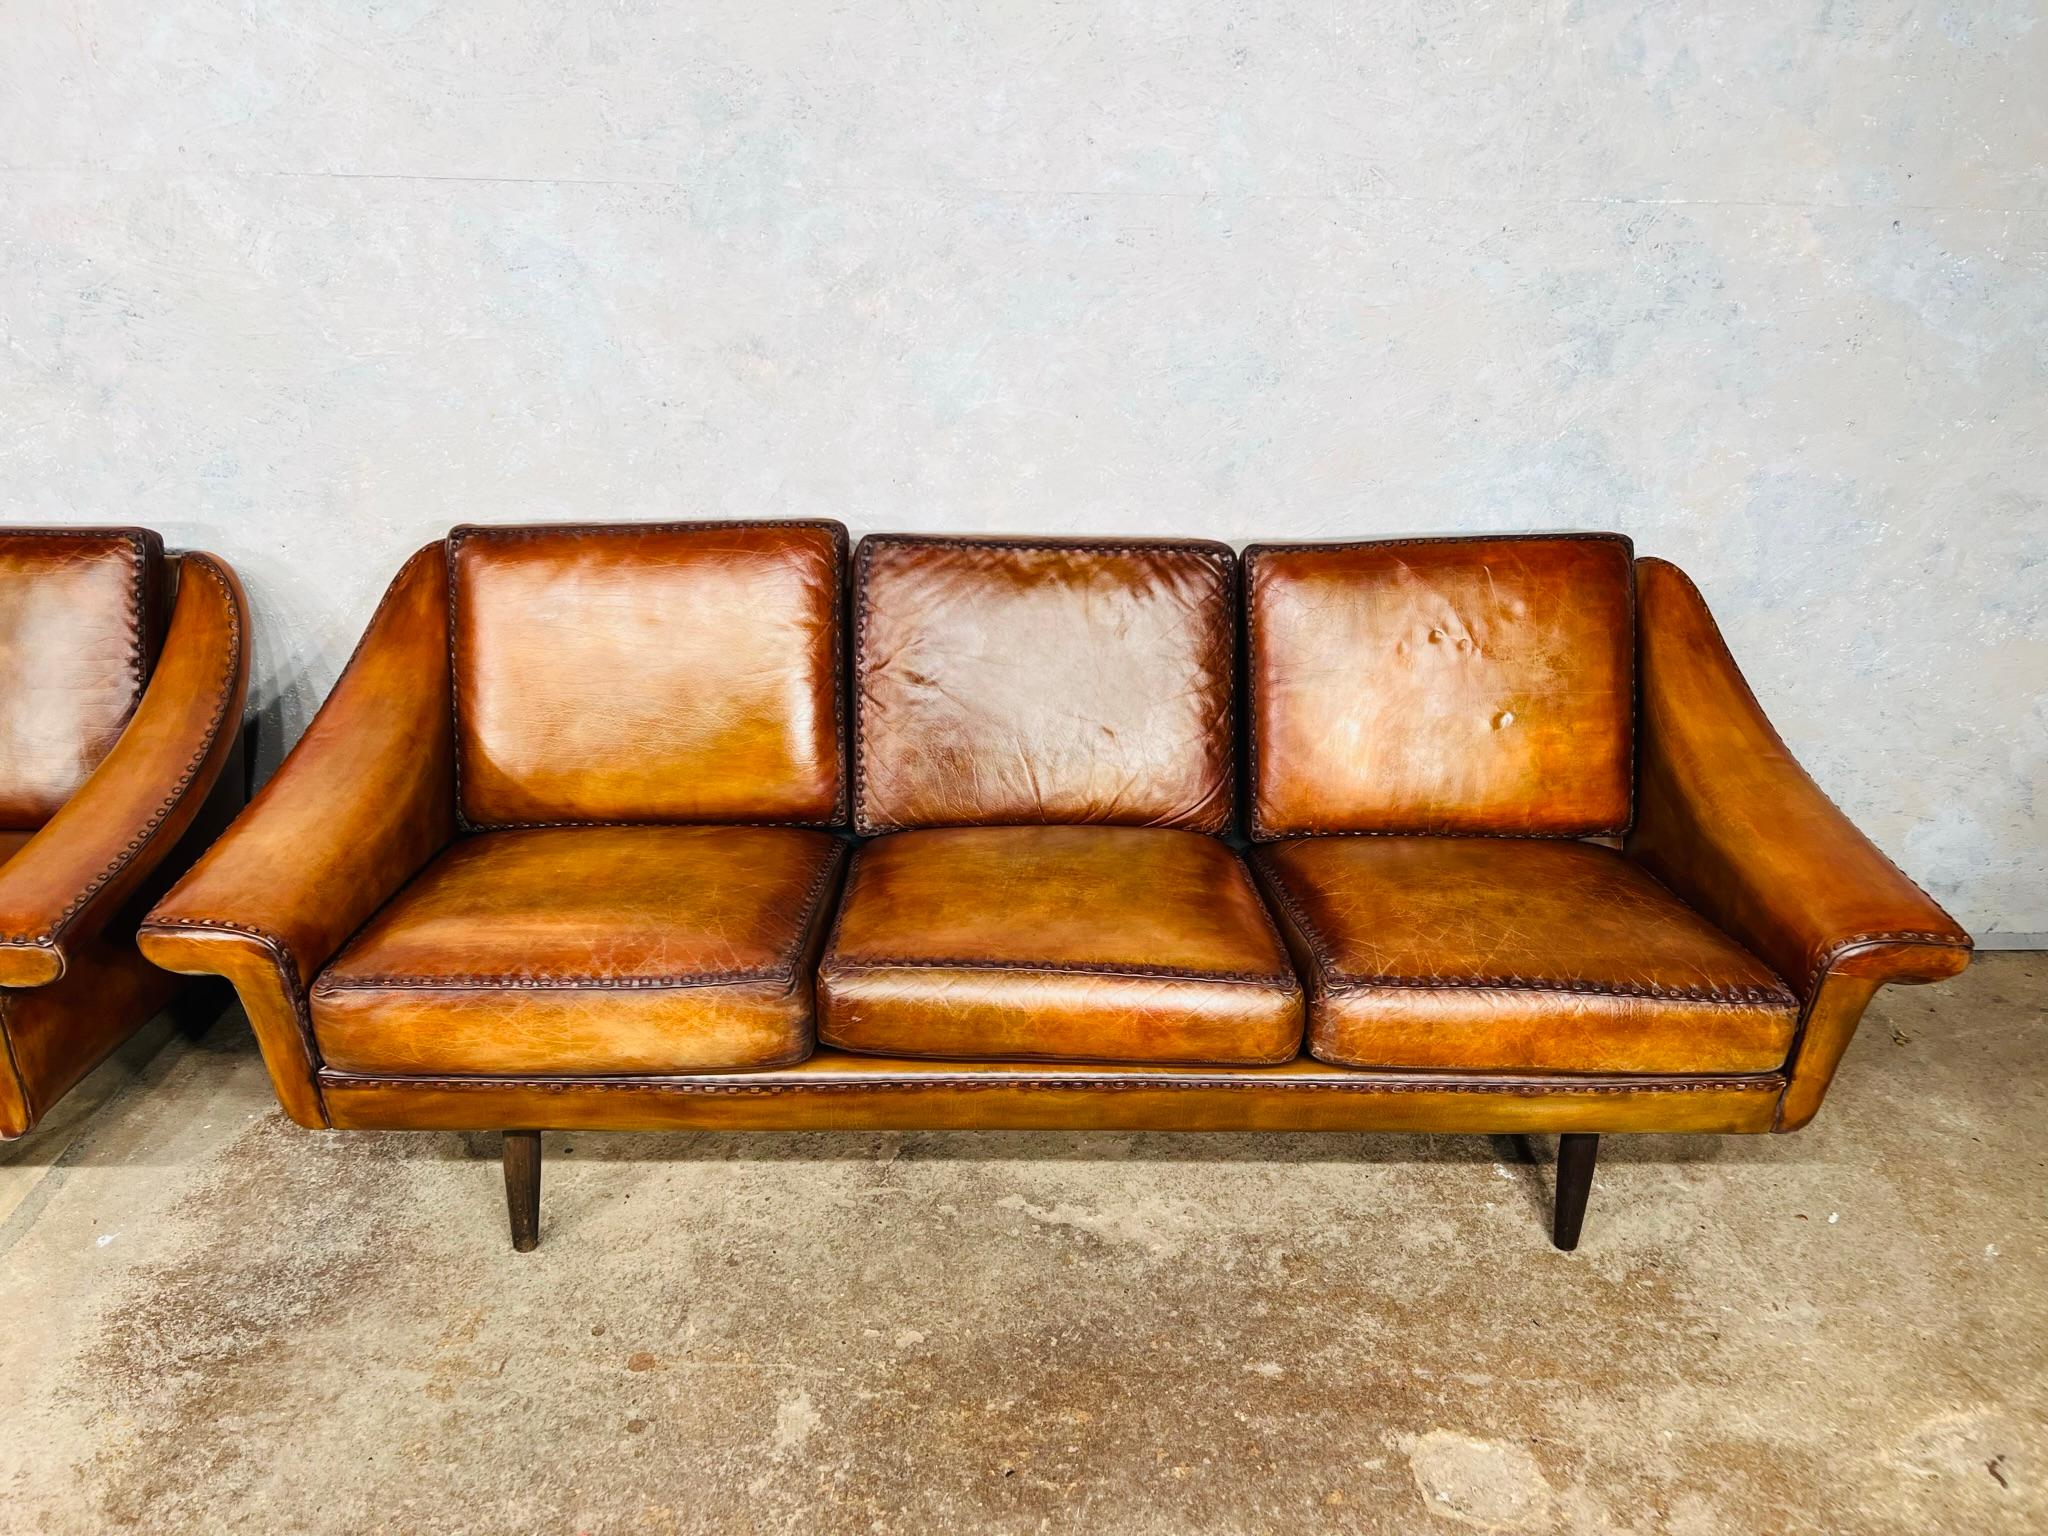 Pair Of Matador Leather 3 Seater Sofa by Aage Christiansen for Eran 1960s #642 In Good Condition For Sale In Lewes, GB